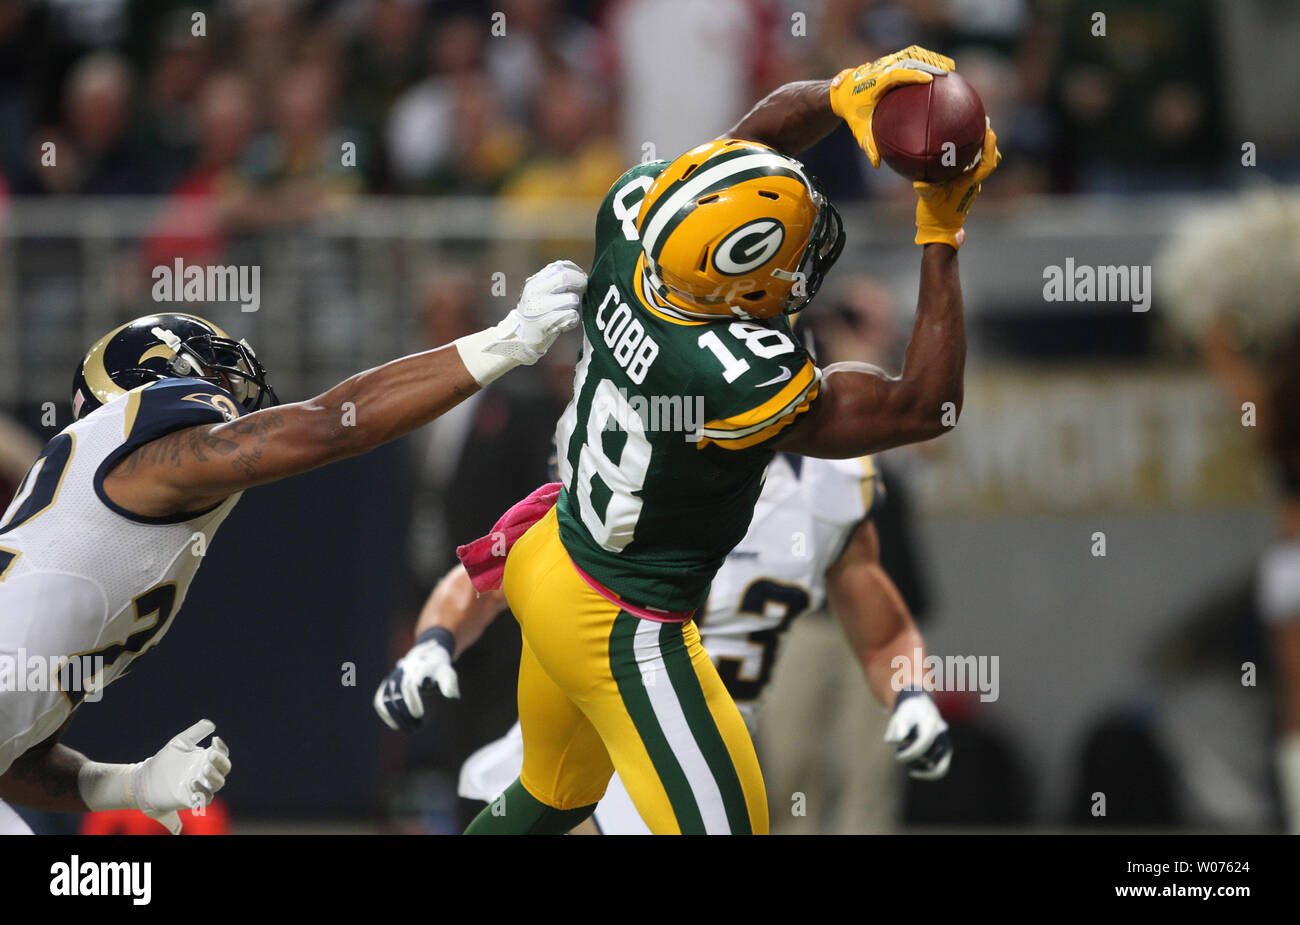 Green Bay Packers Randall Cobb makes a touchdown grab in the fourth quarter against the St. Louis Rams at the Edward Jones Dome in St. Louis on October 21, 2012. Green Bay won the game 30-20.     UPI/Bill Greenblatt Stock Photo